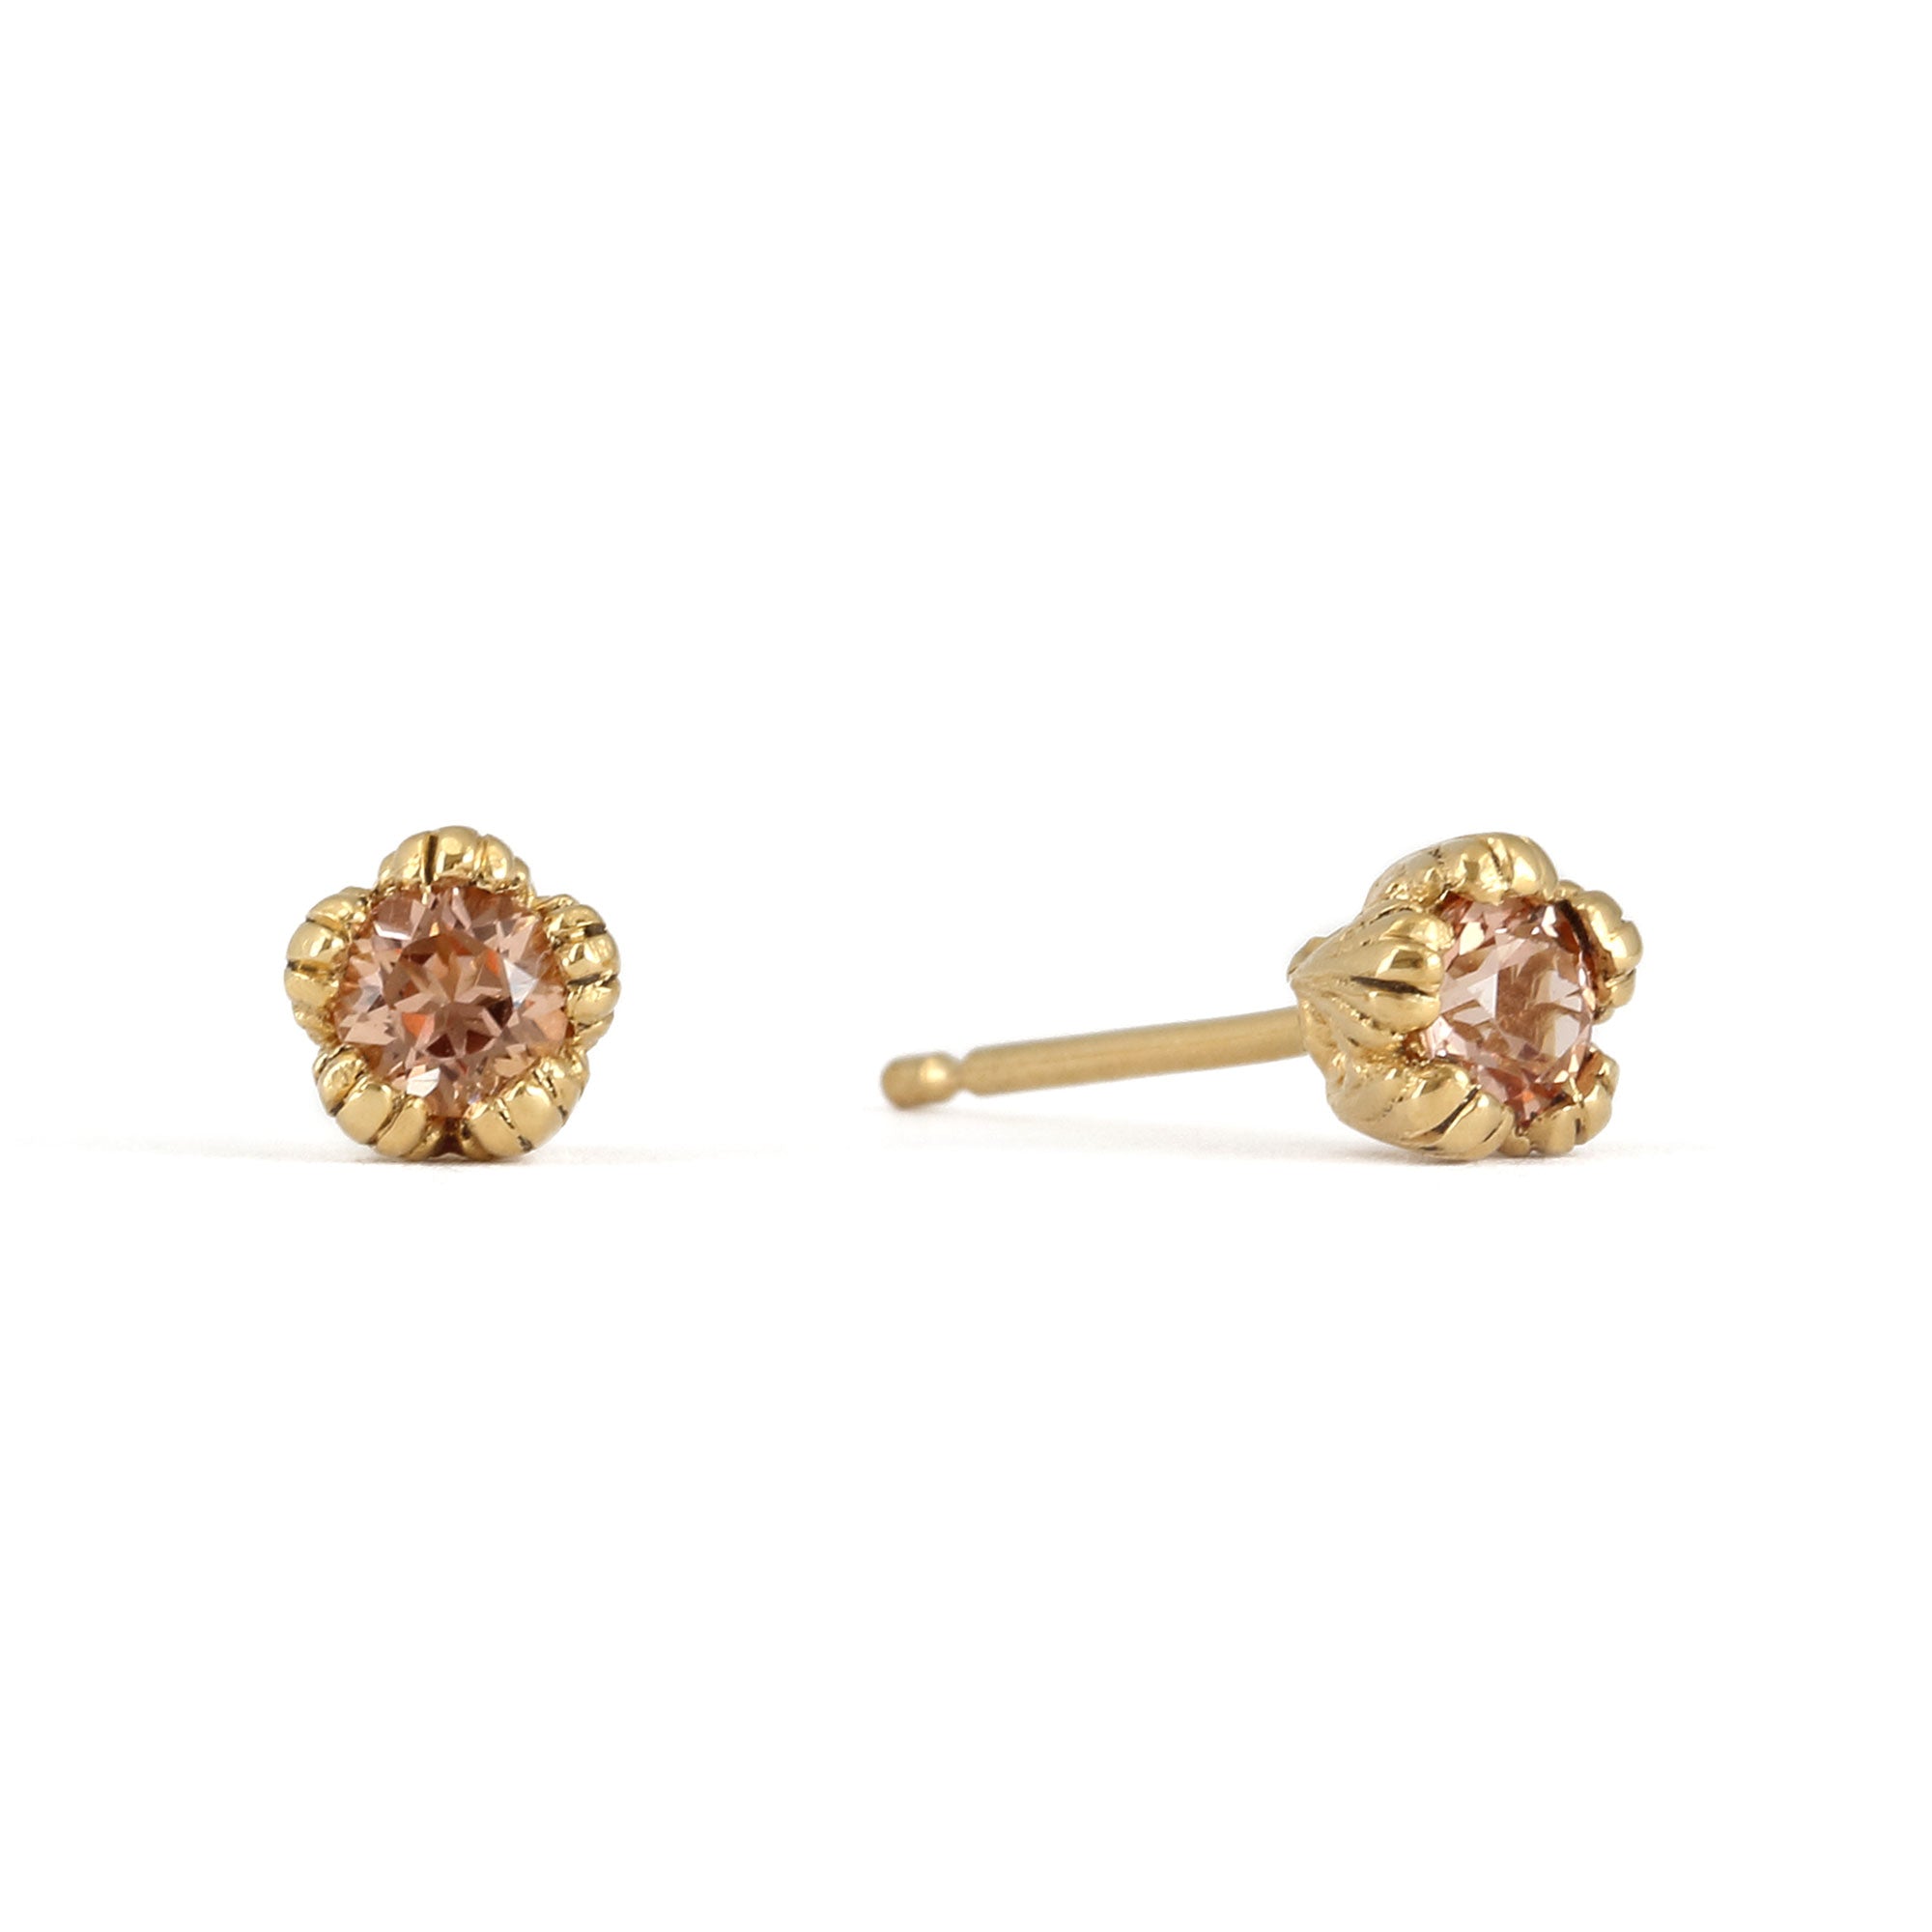 Villa Yellow Gold and Imperial Topaz Stud Earrings